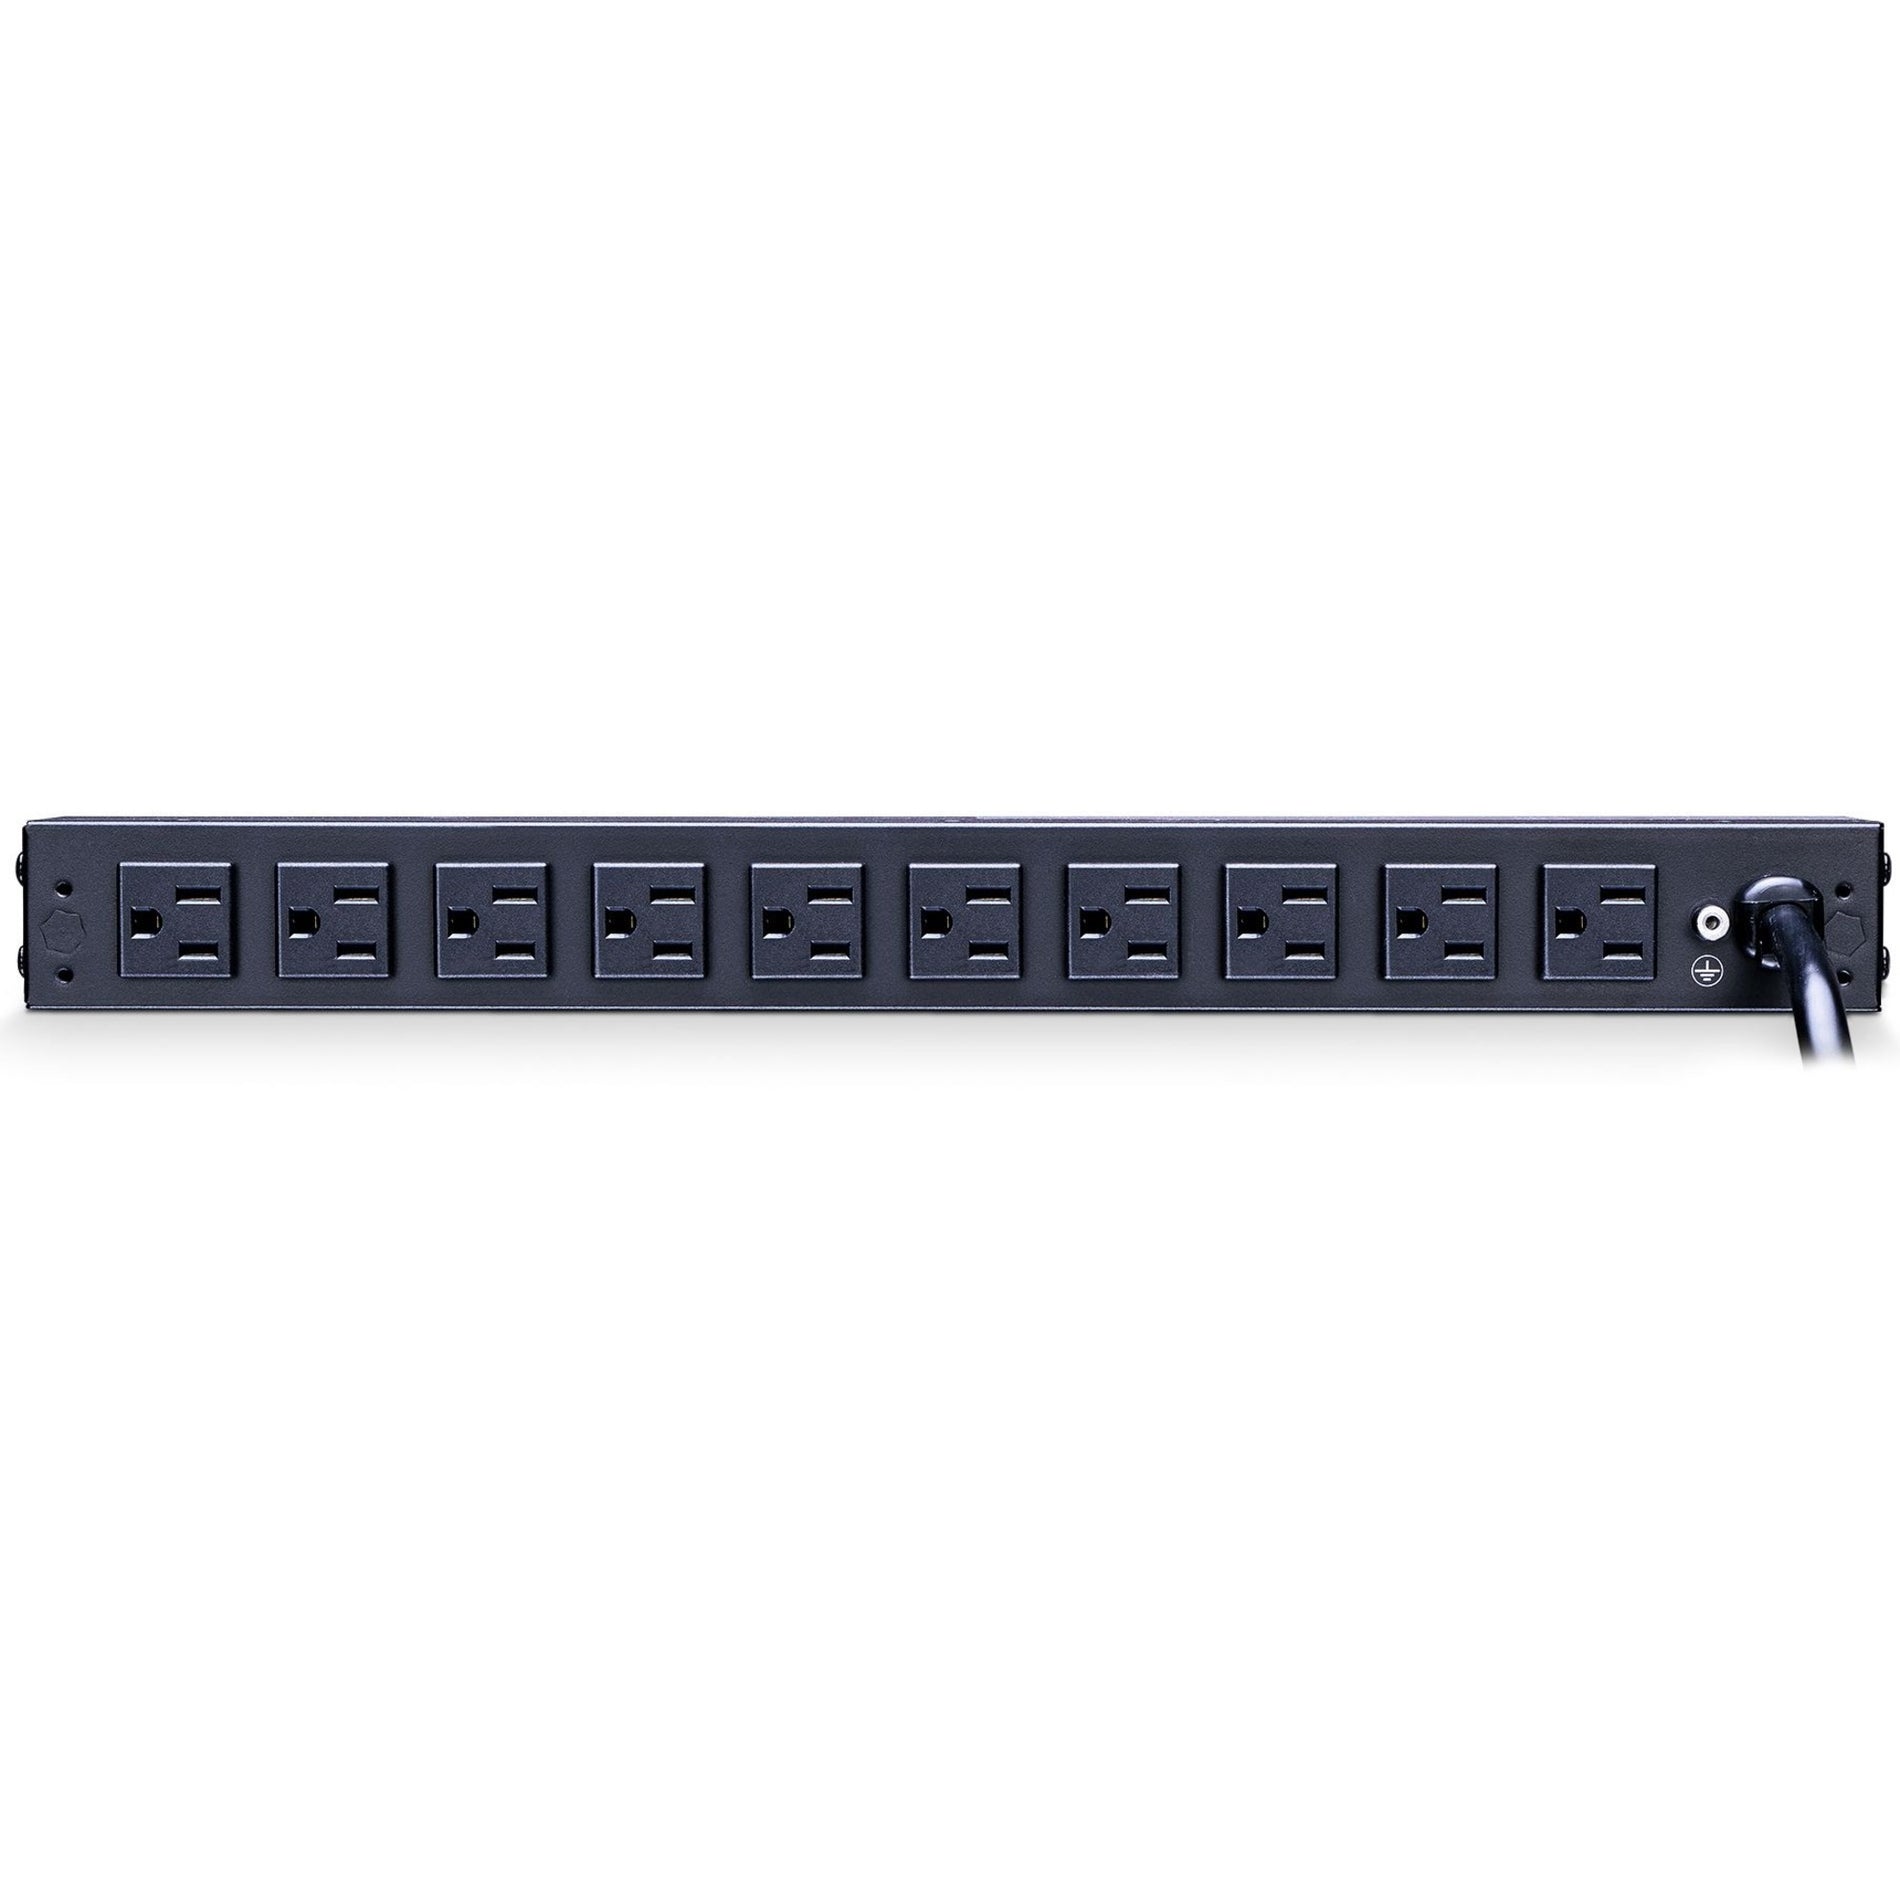 CyberPower PDU15M2F10R 12-Outlets PDU 100-125VAC 15A Metered Power Distribution Unit